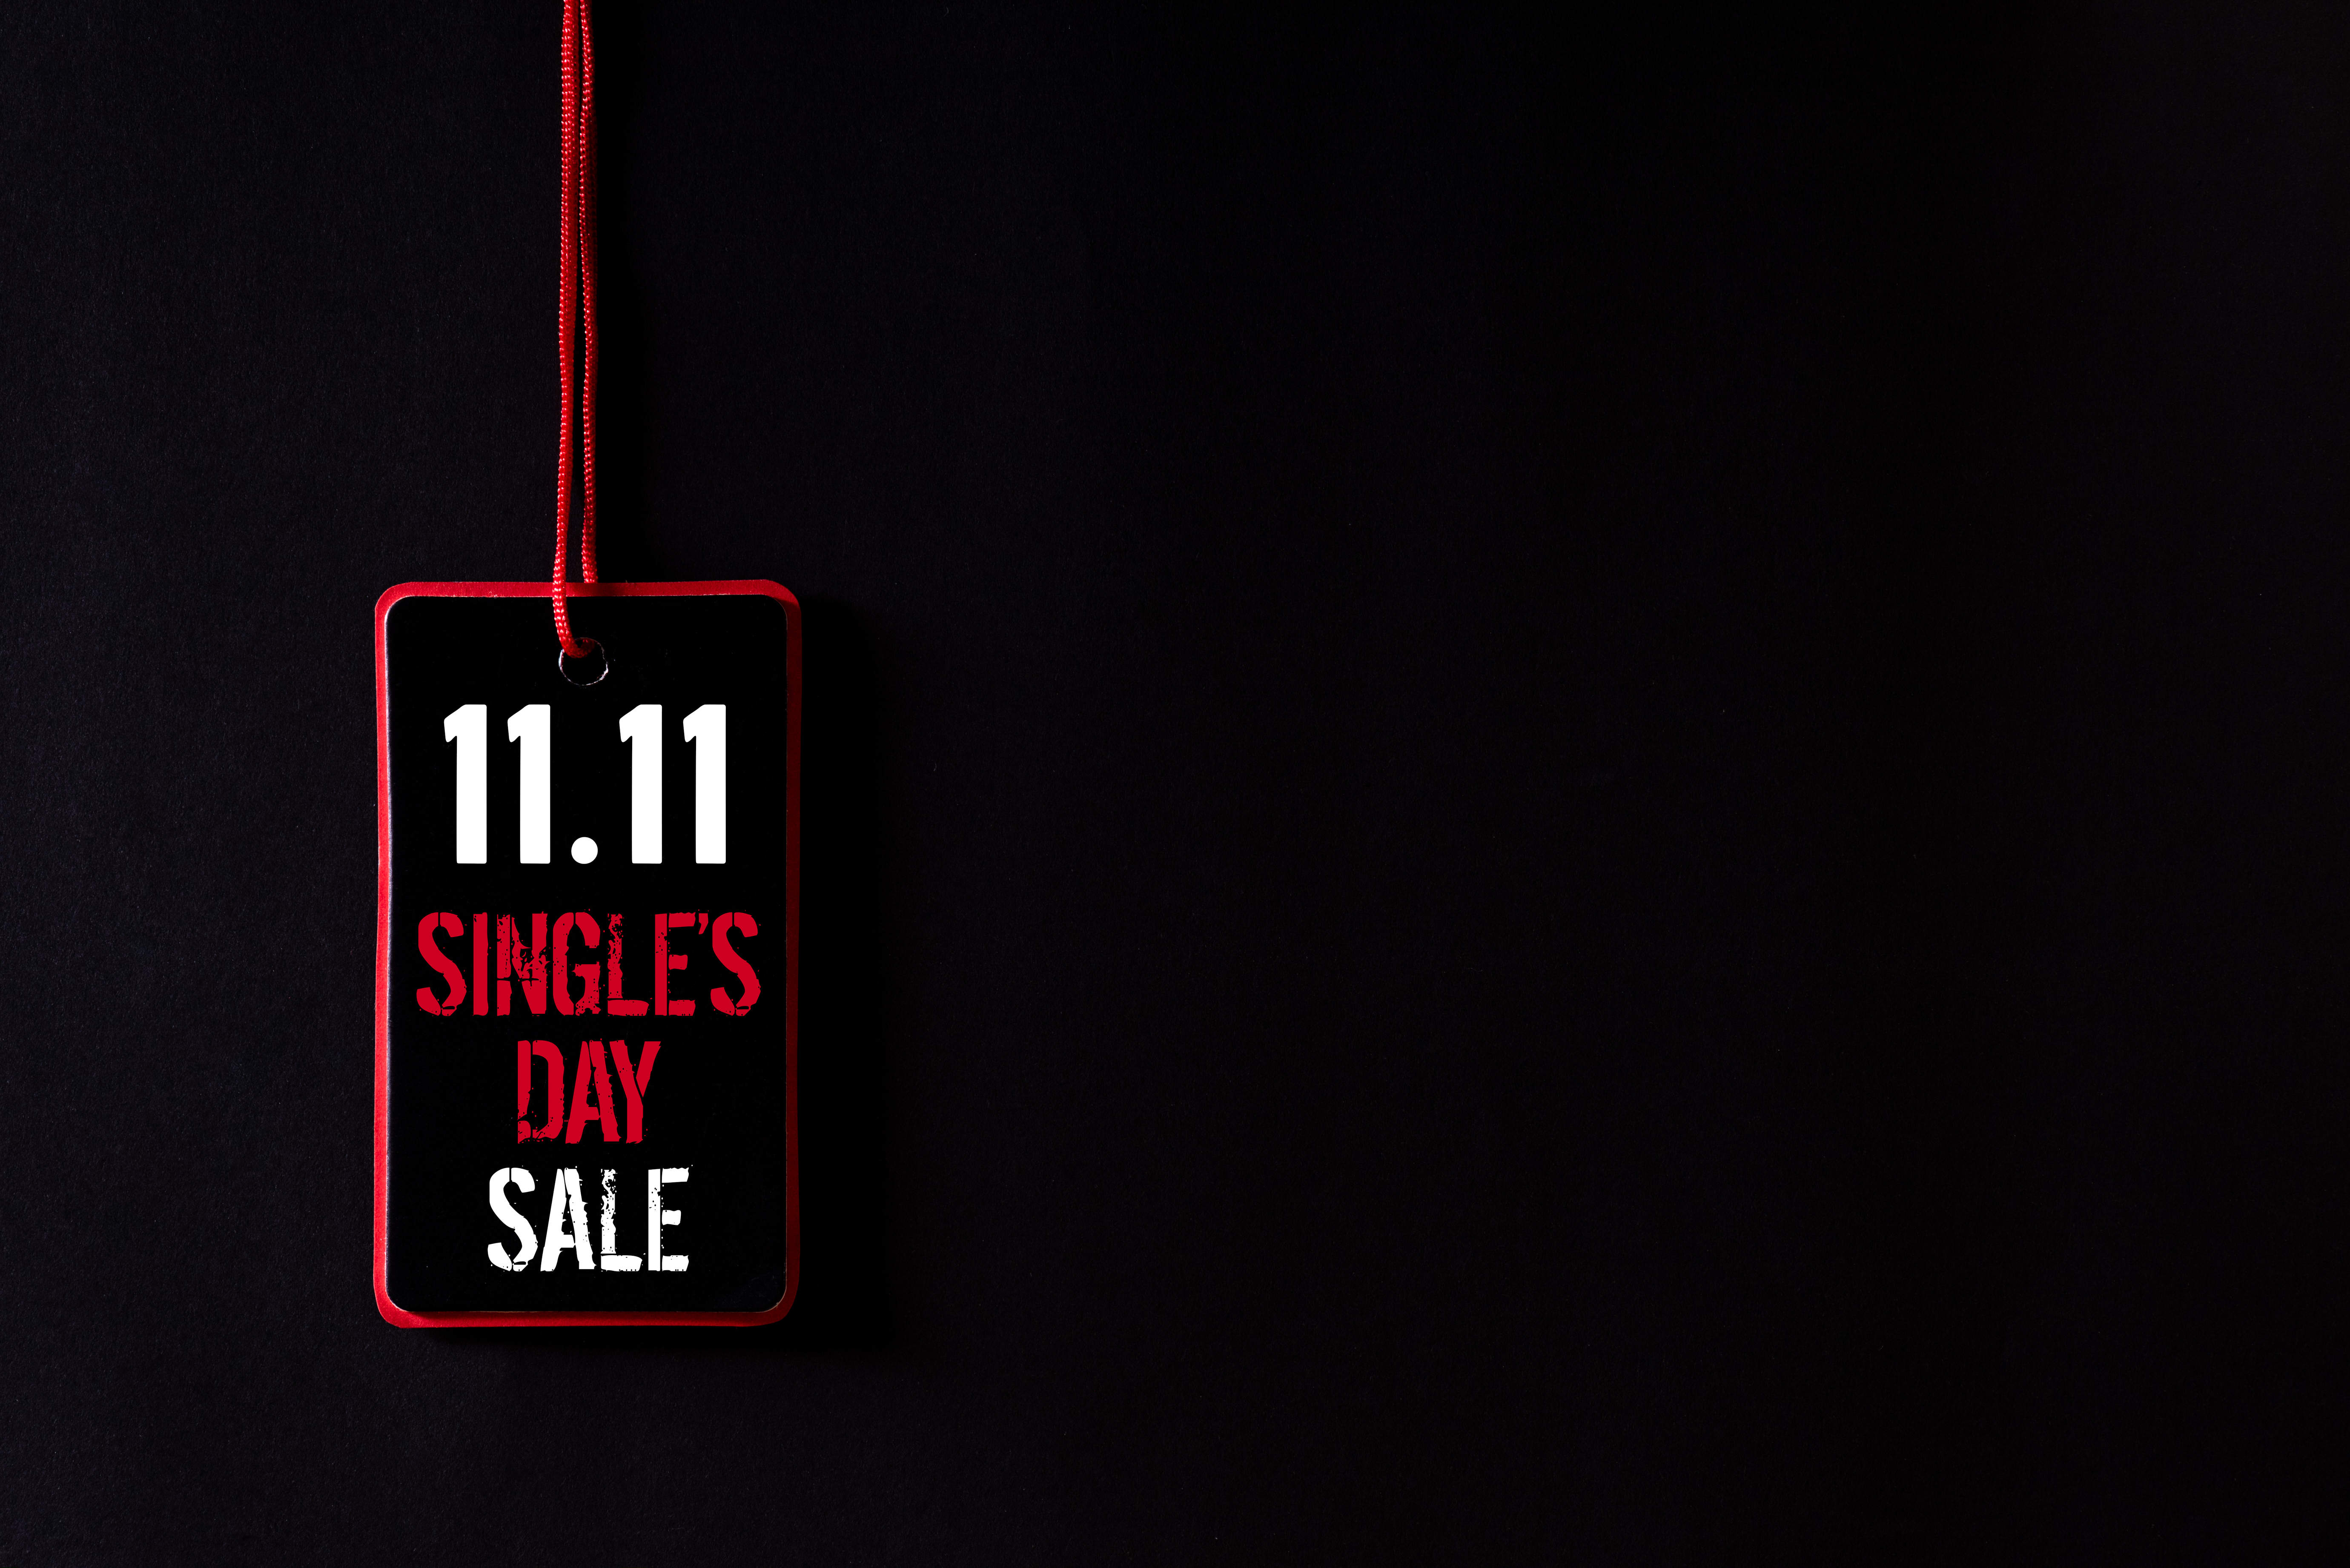 Single’s Day, the biggest shopping bonanza in China, hit an all-time record in 2020